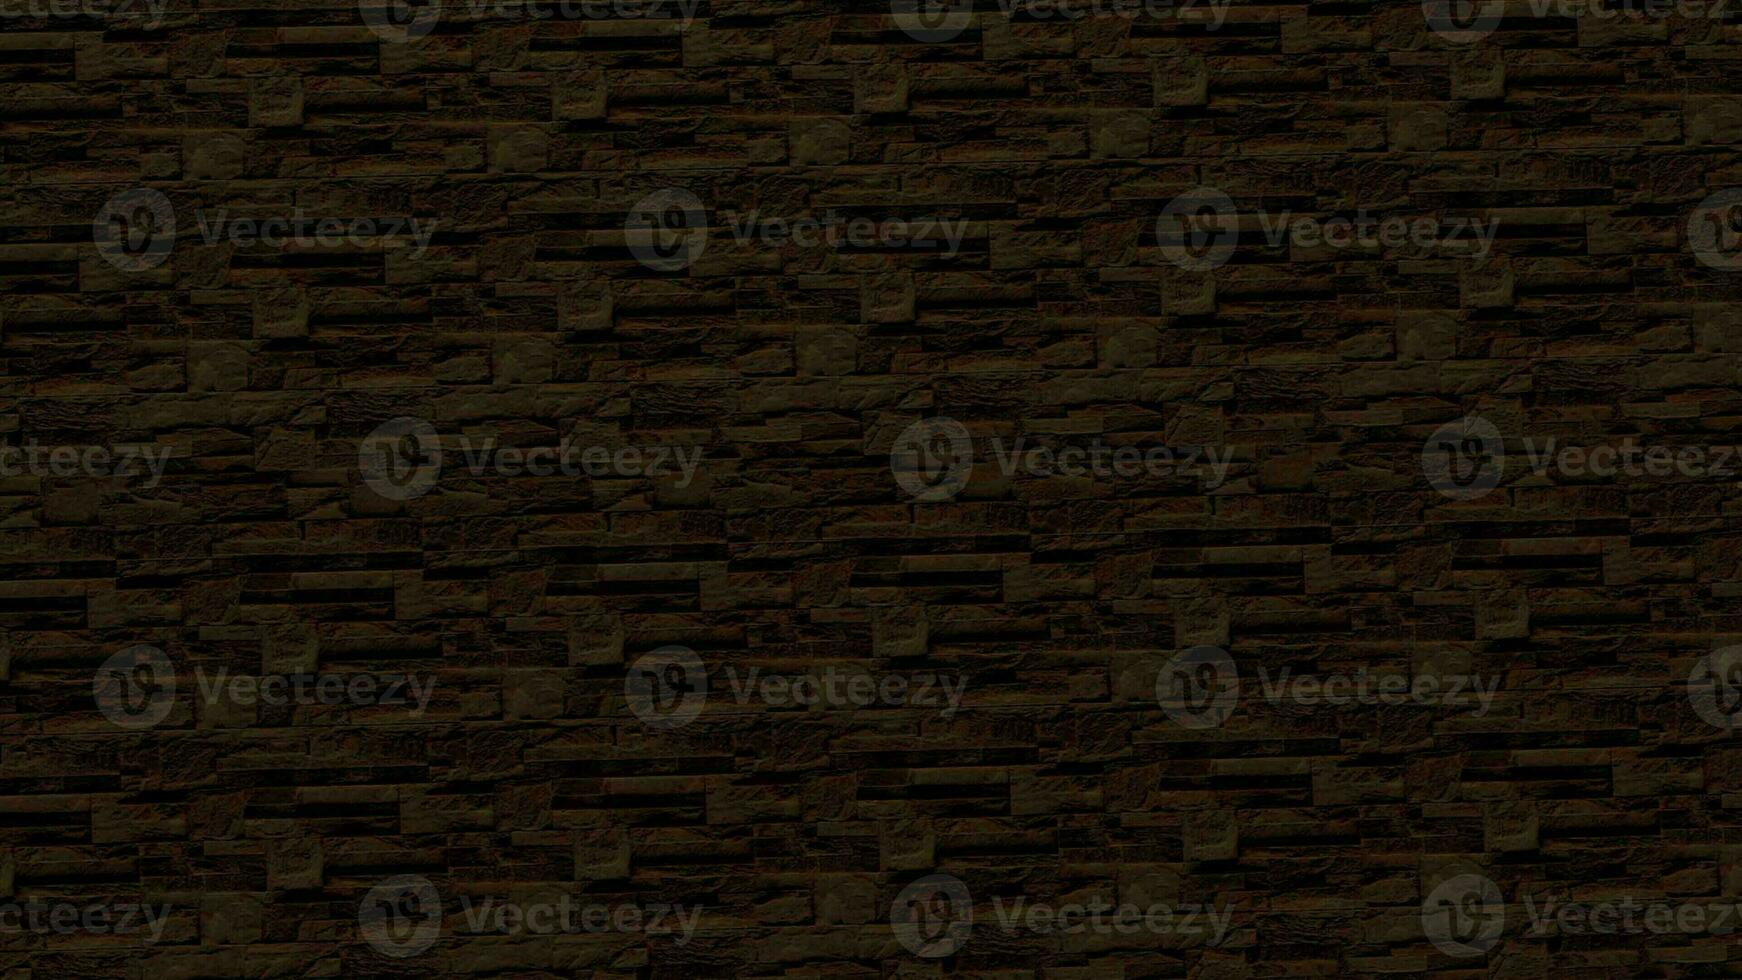 Stone texture natural pattern brown for background or cover photo